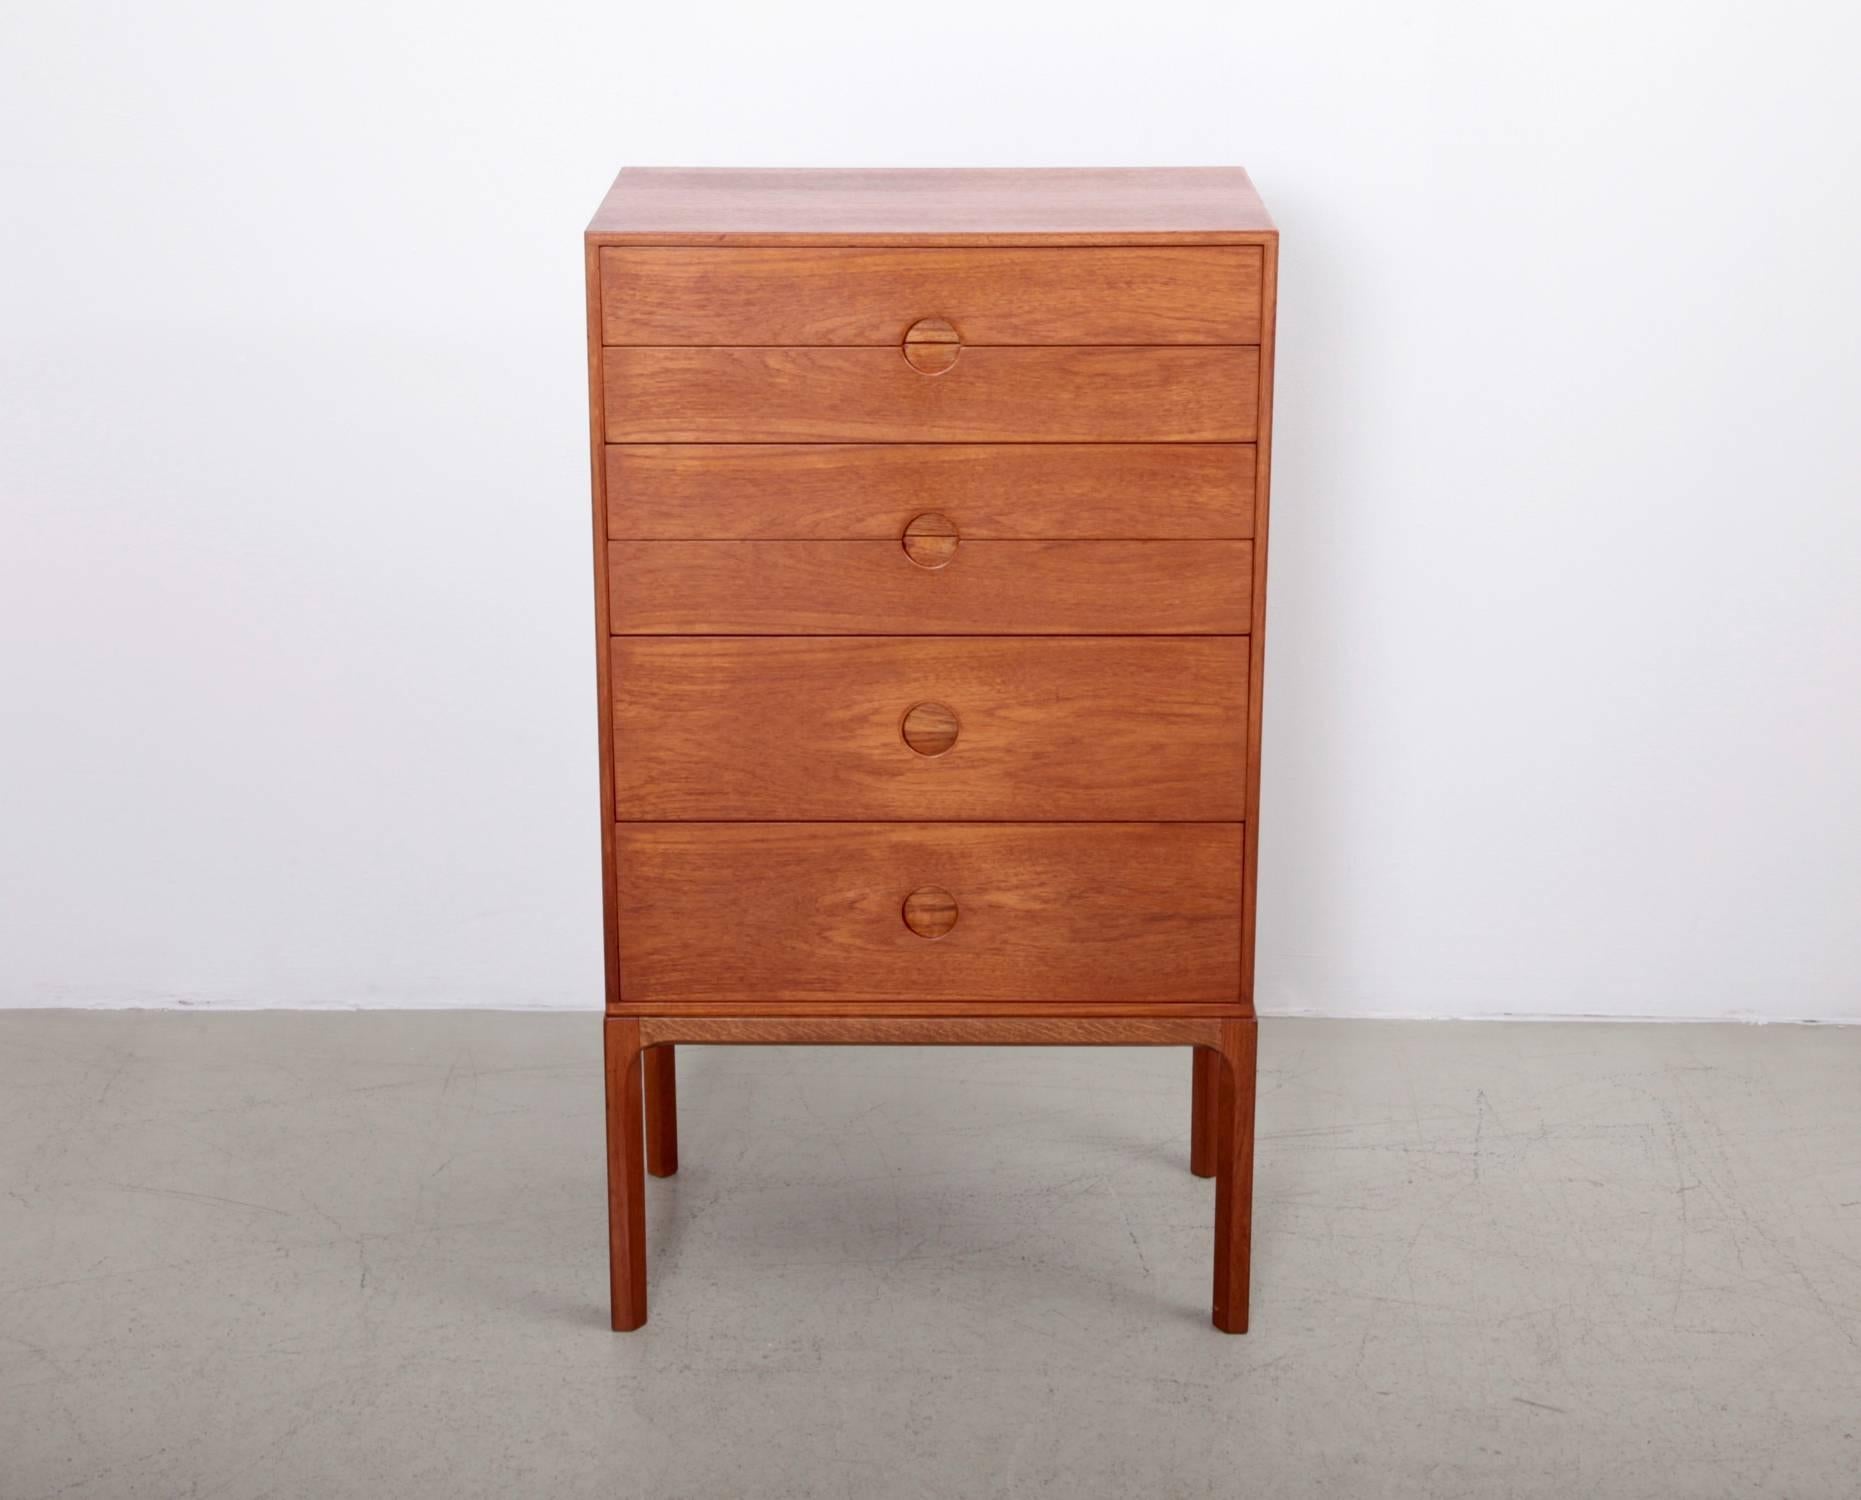 This chest of drawers designed by Aksel Kjersgaard for his furniture company 